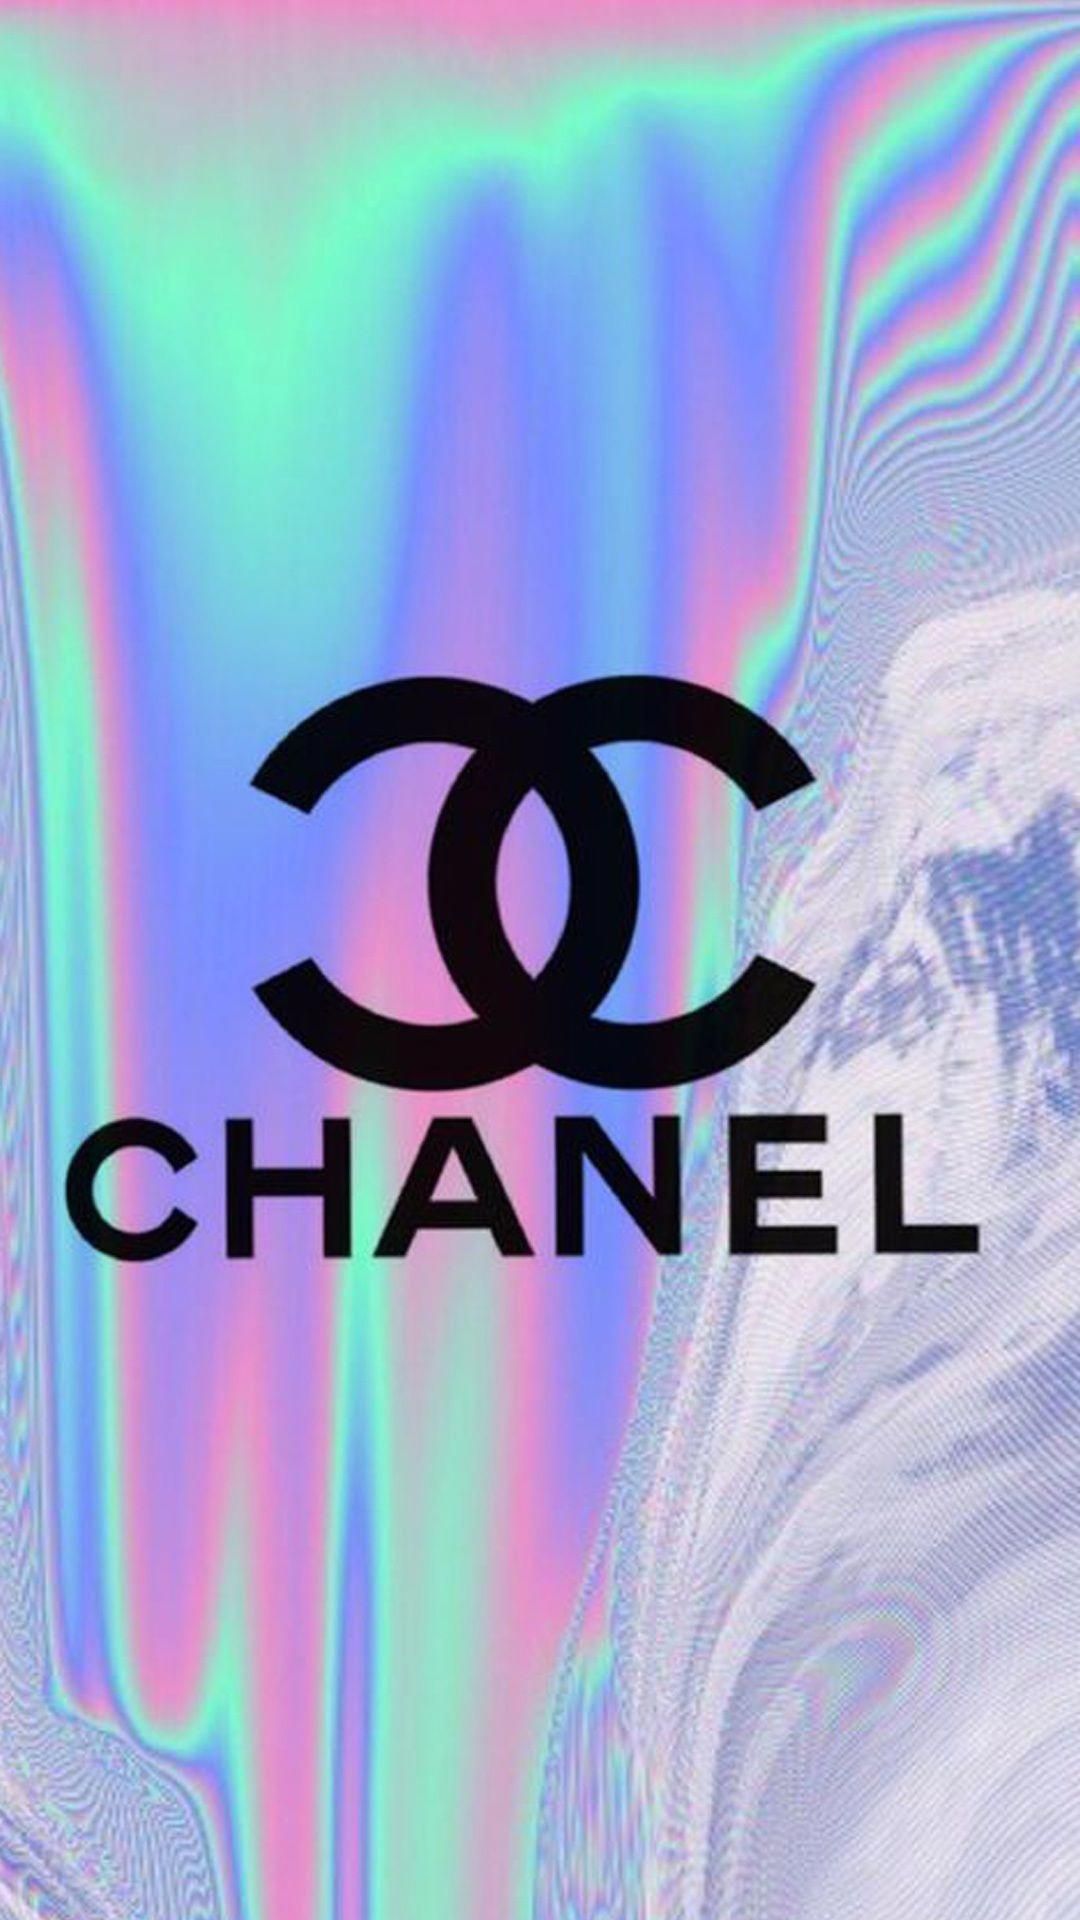 Free download Girly Chanel Iphone Wallpaper Wallpapers For Iphone ...